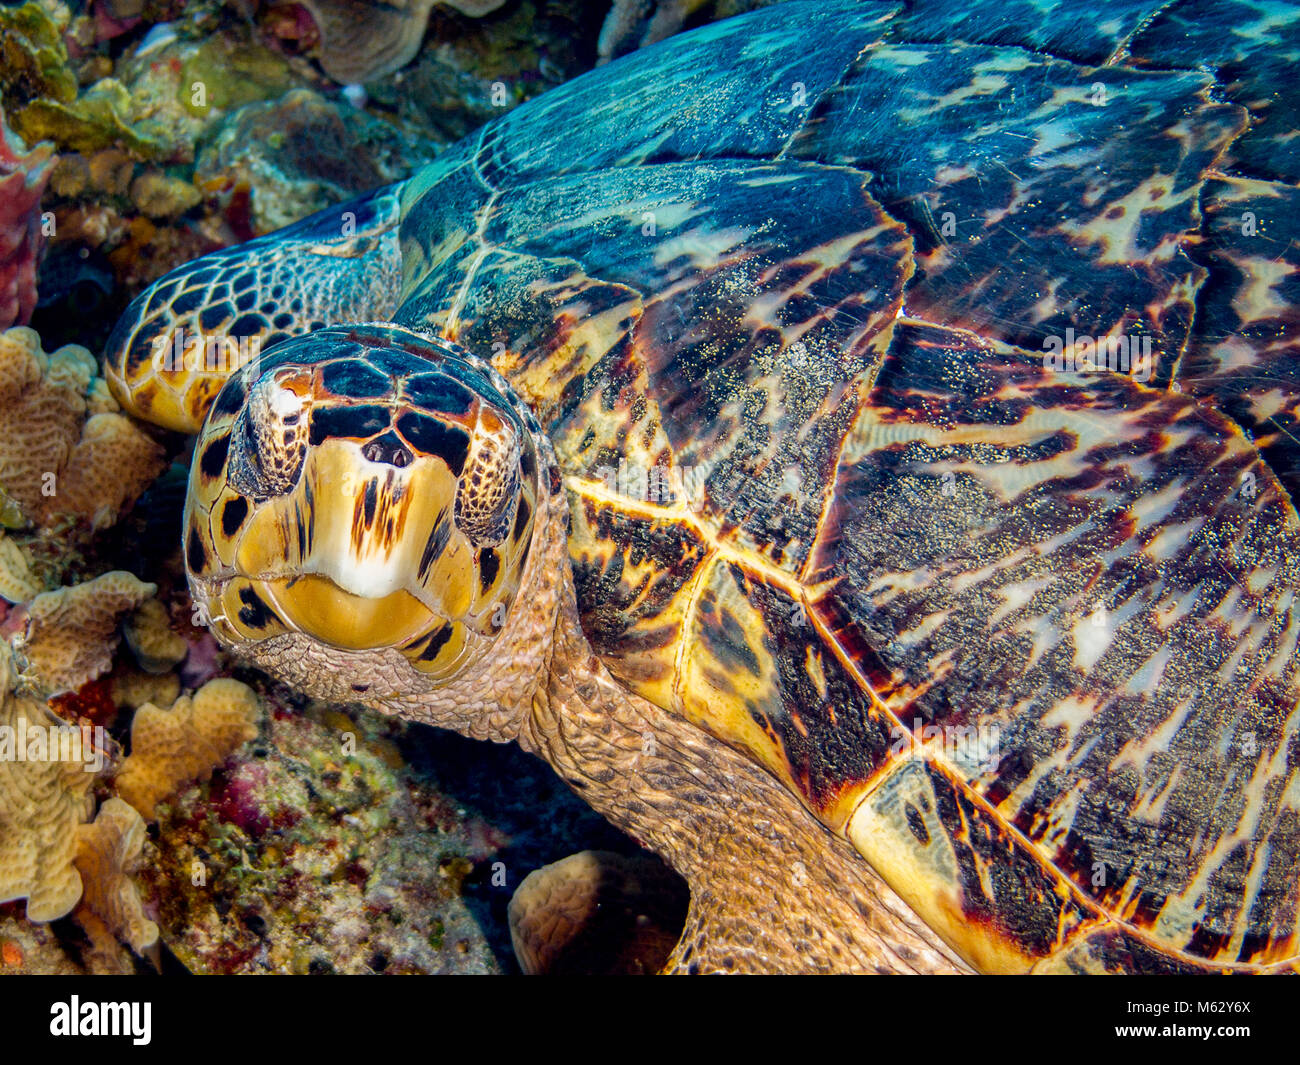 Turtle, Hawksbill, resting on coral while looking at camera Stock Photo